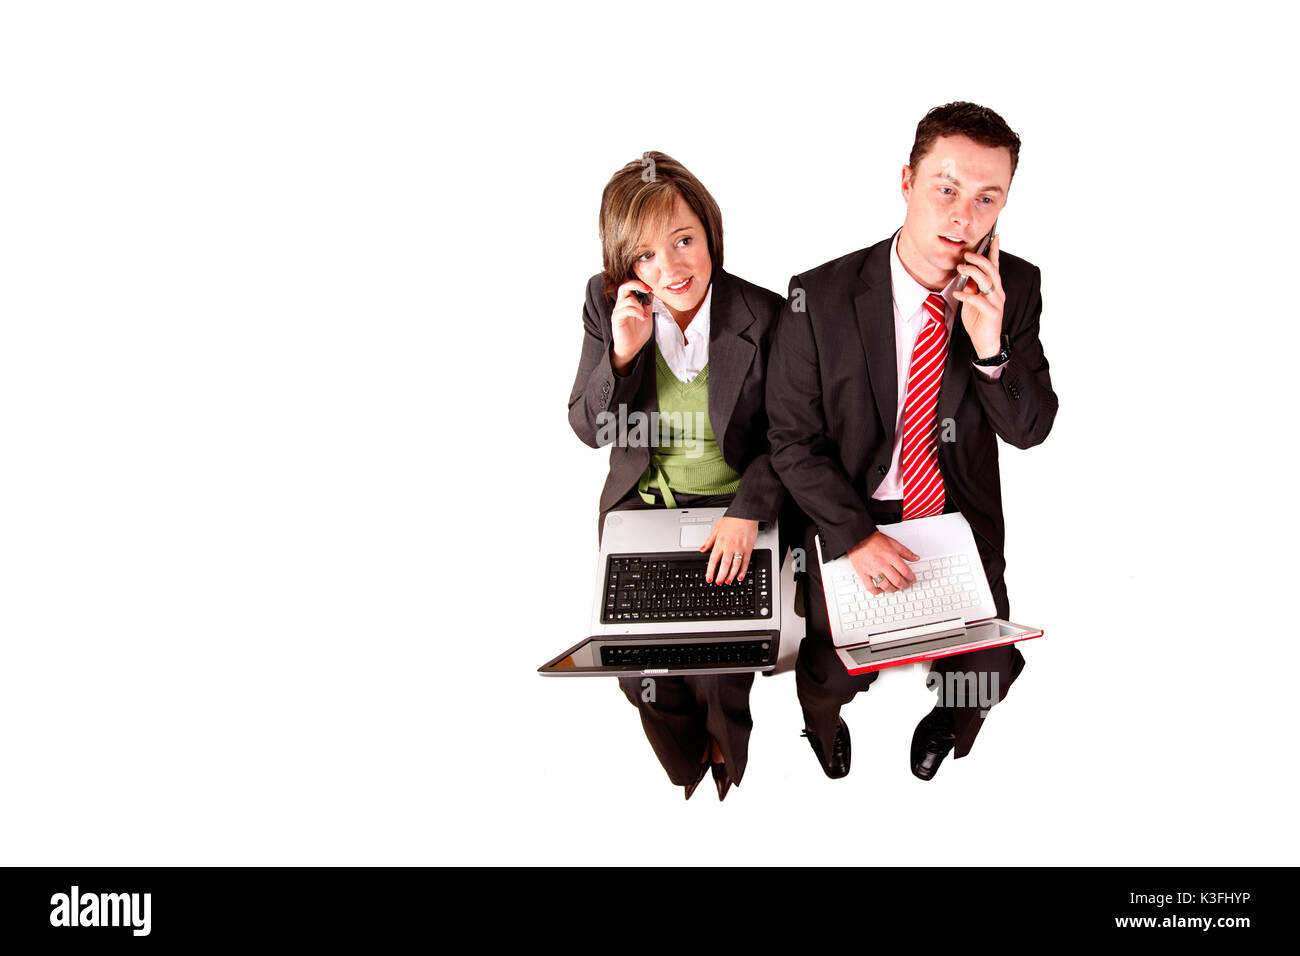 a man and woman in a white studio collaborate with latops and cellphones, communicating about finance, accounting or business Stock Photo